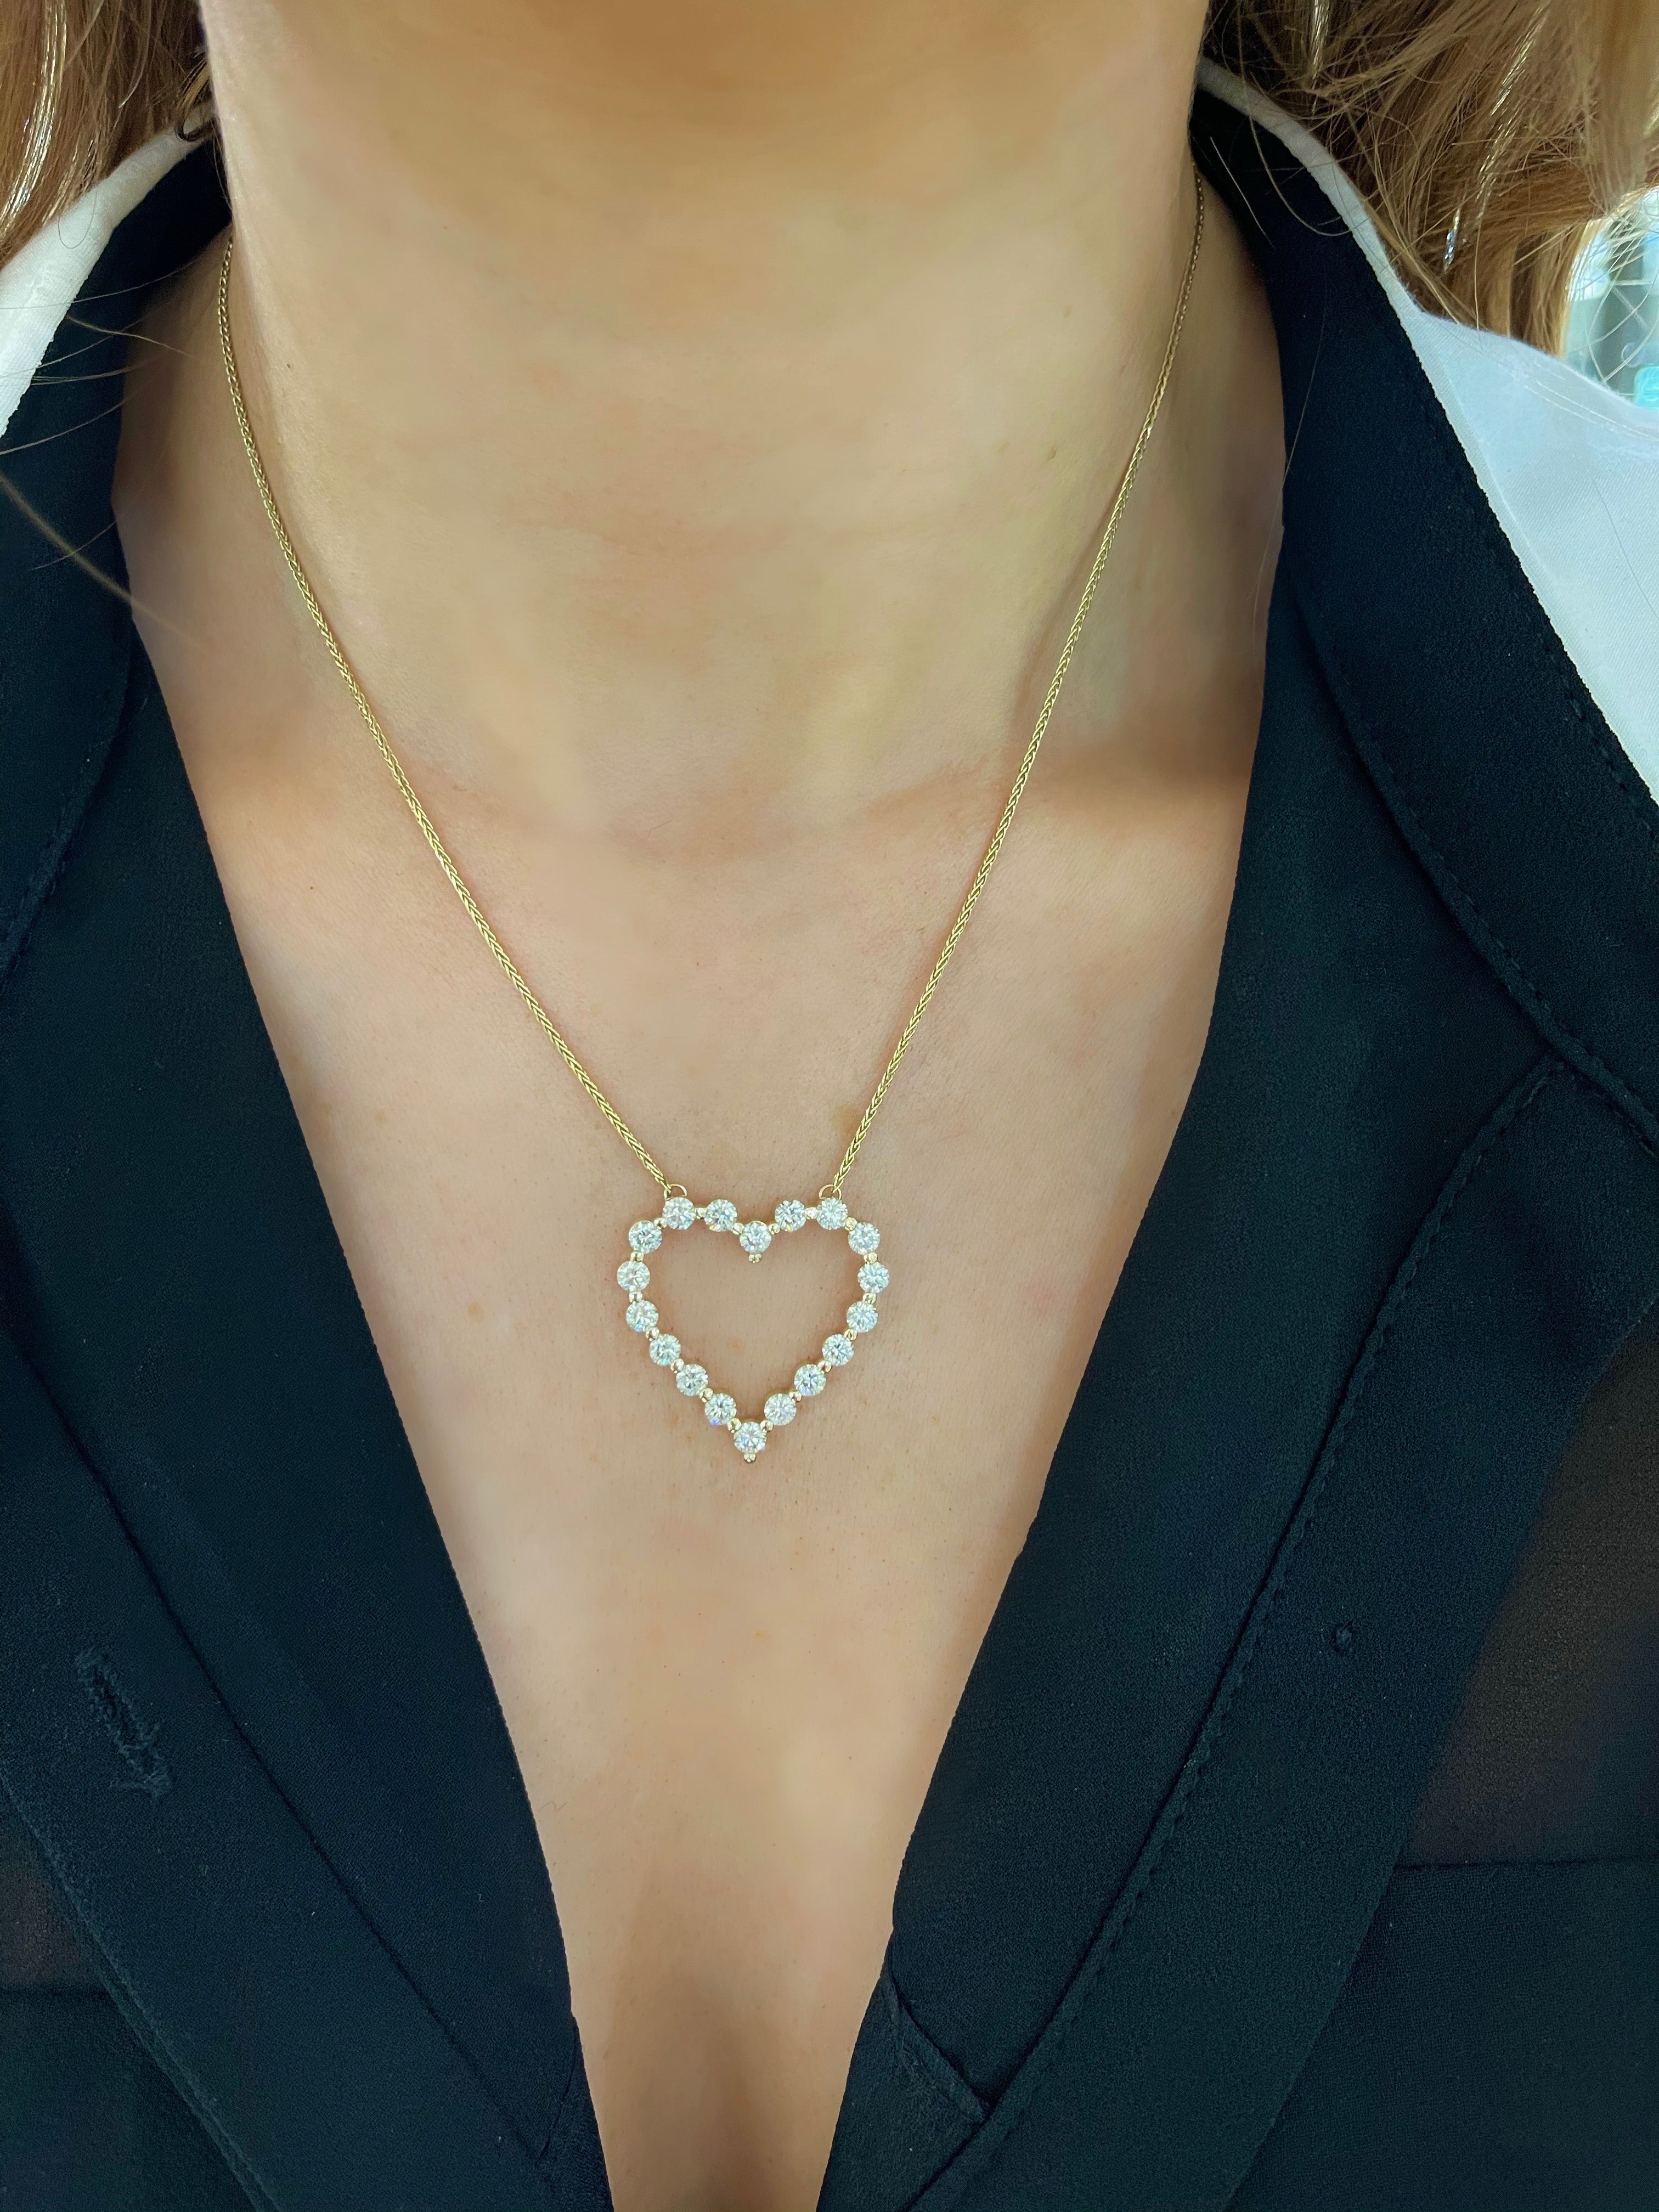 heart necklaces | Nordstrom